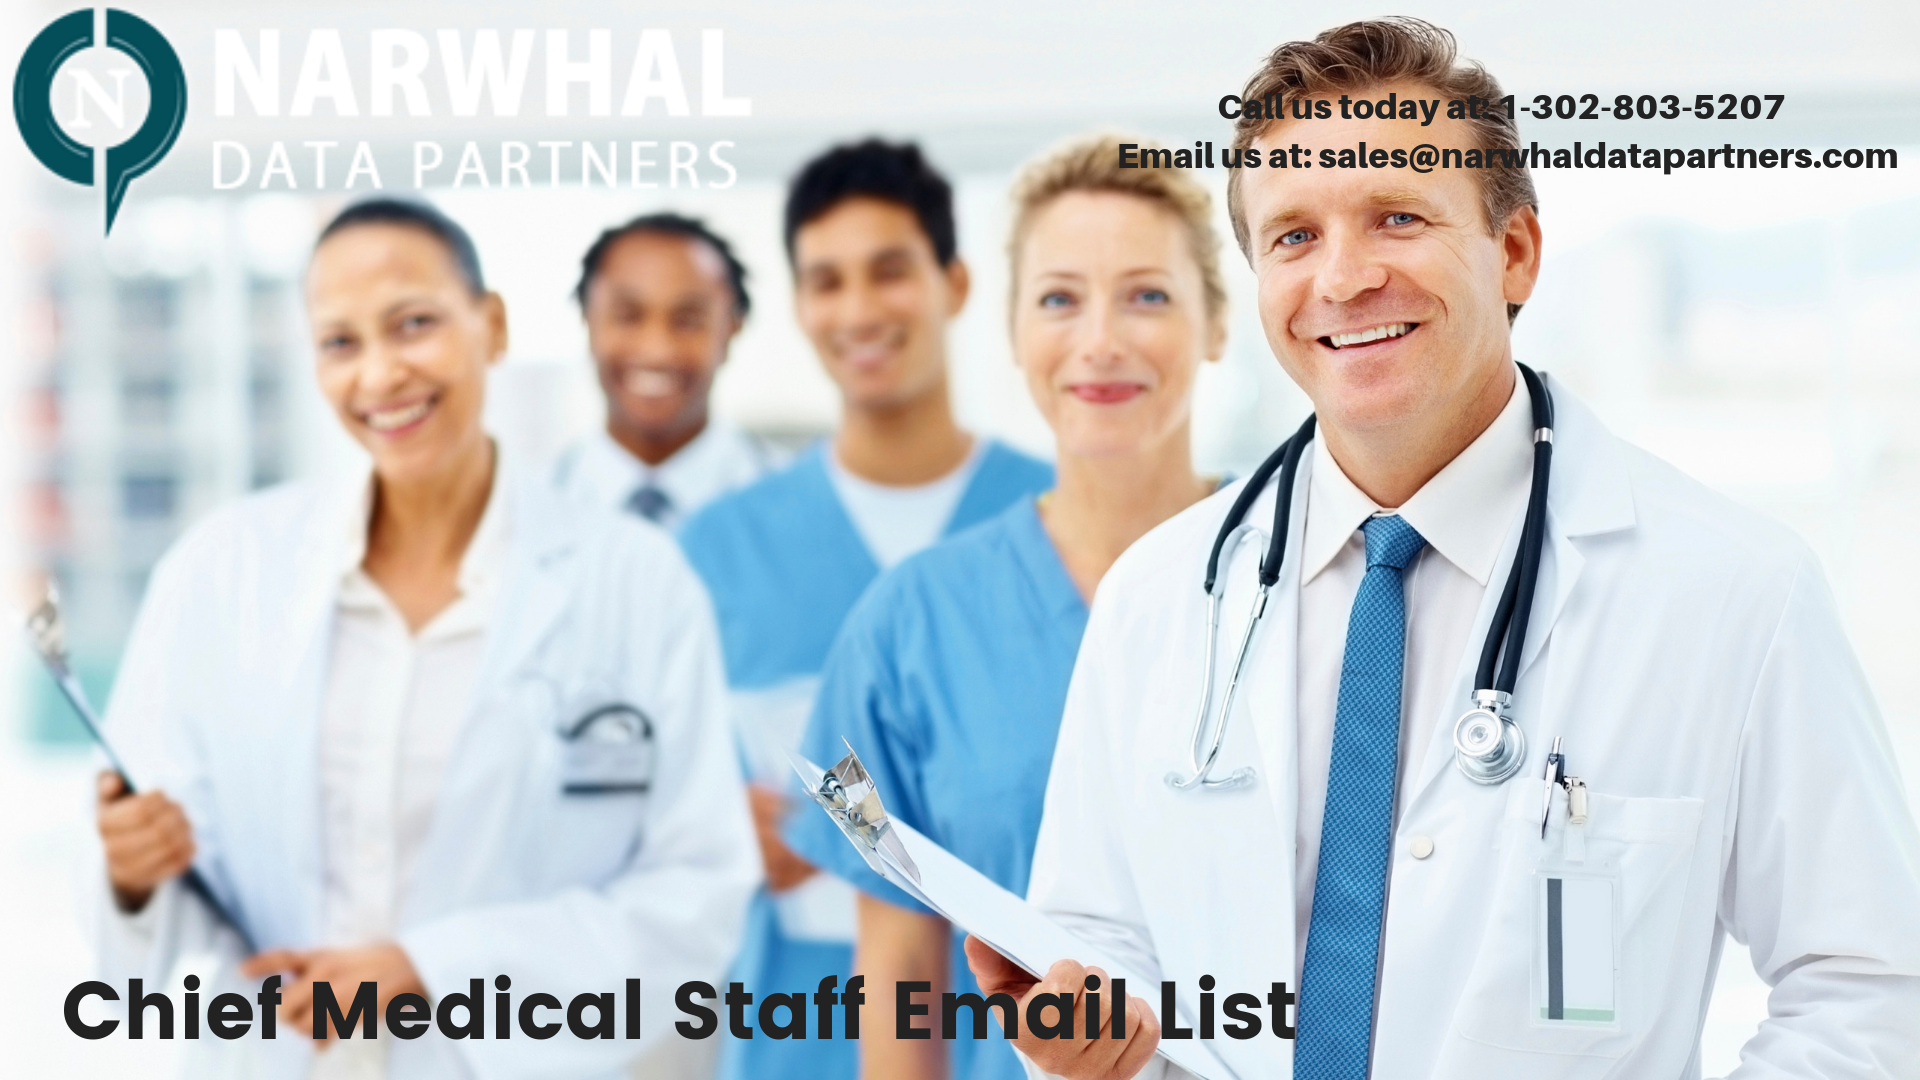 http://narwhaldatapartners.com/chief-medical-staff-email-list.html